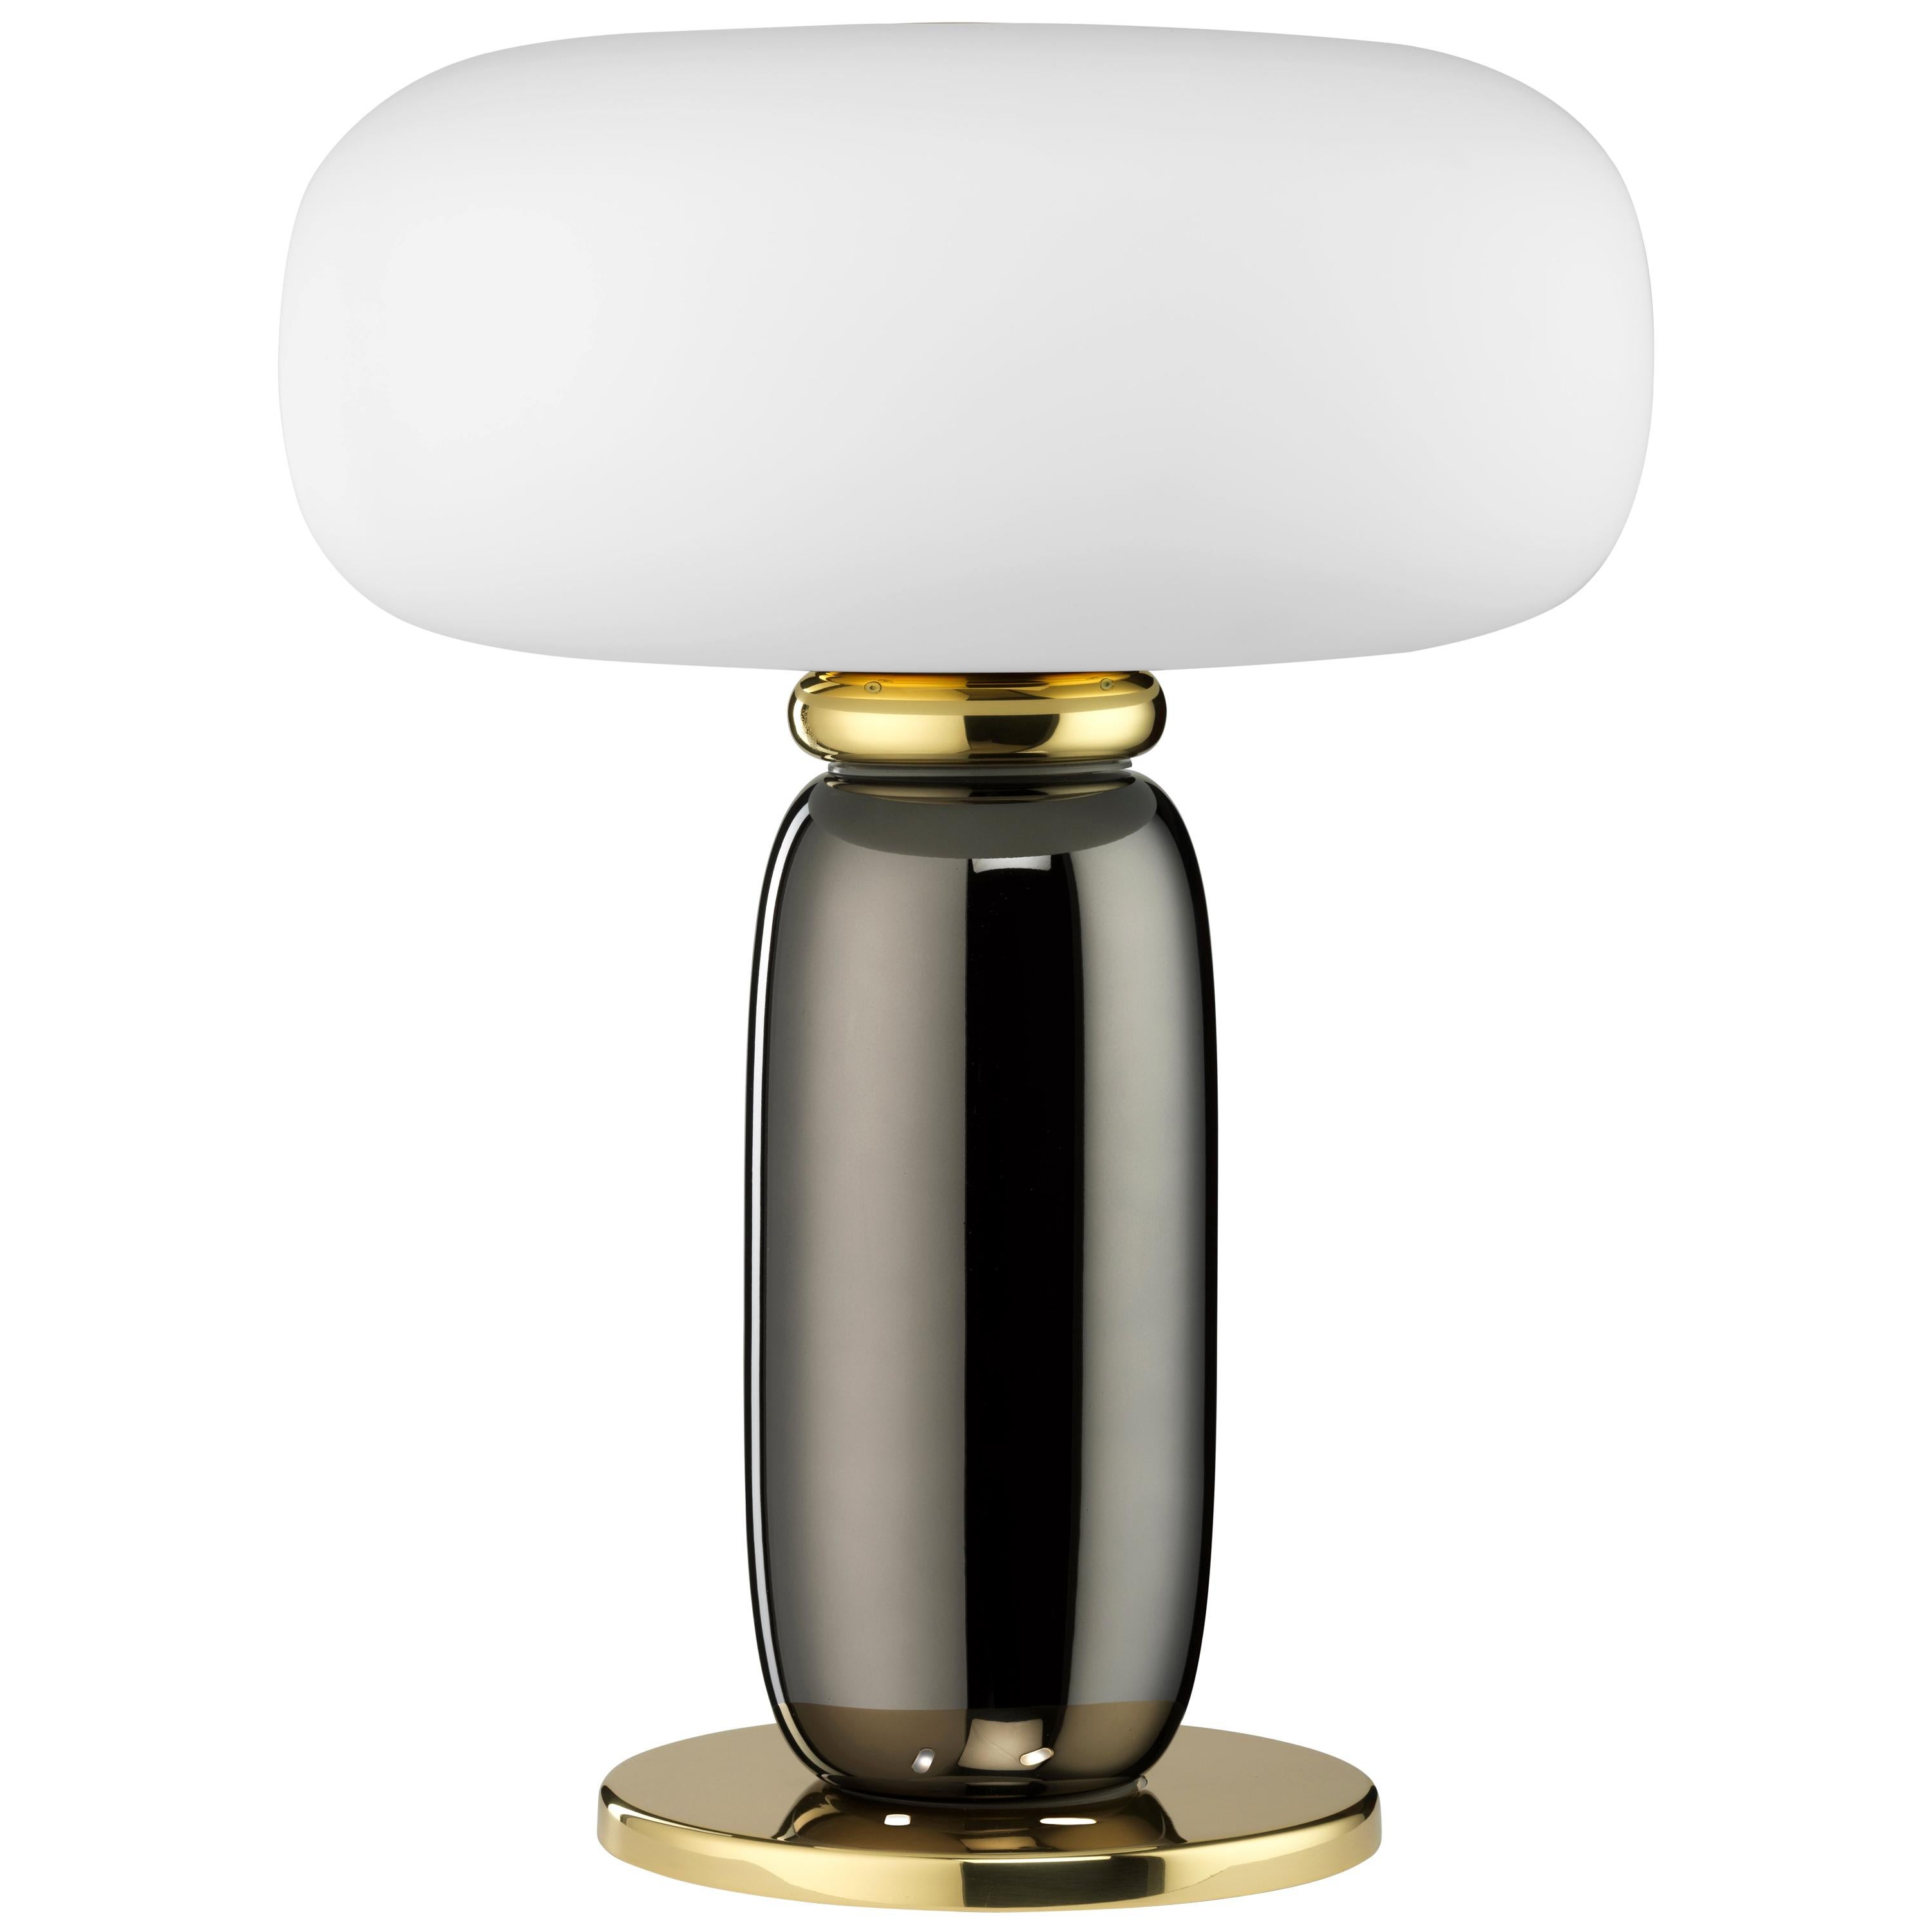 Ghidini 1961 One on One Table Lamp in Polished Brass and Glass by Branch For Sale